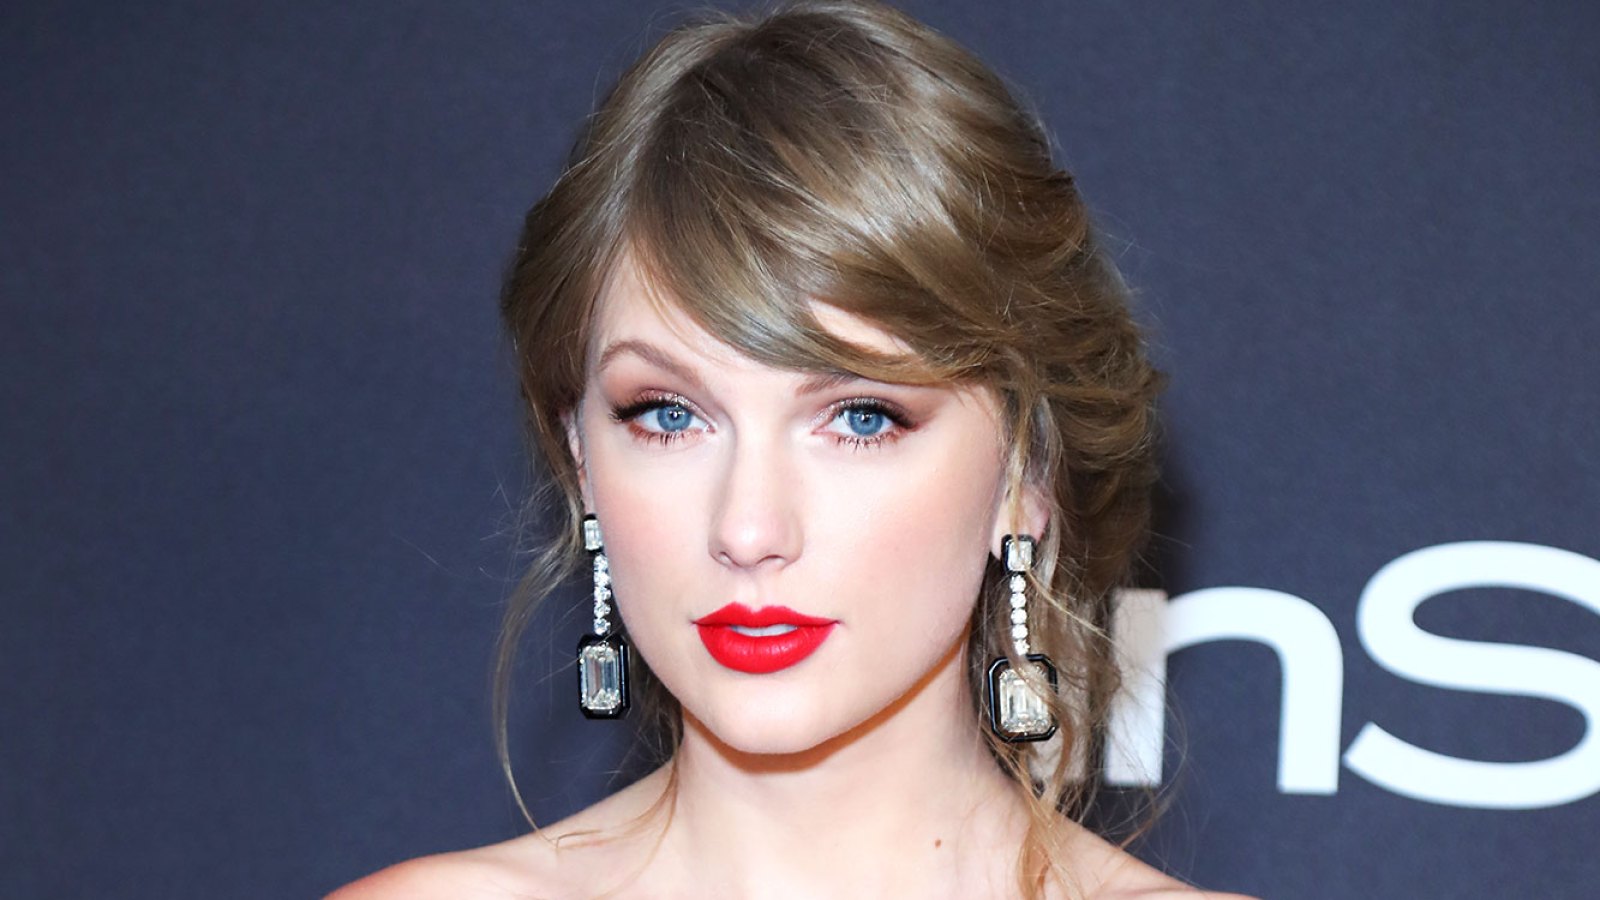 Taylor Swift Shrugs Off Stolen Car Crashing Into Her Home With Her Own Song Lyrics